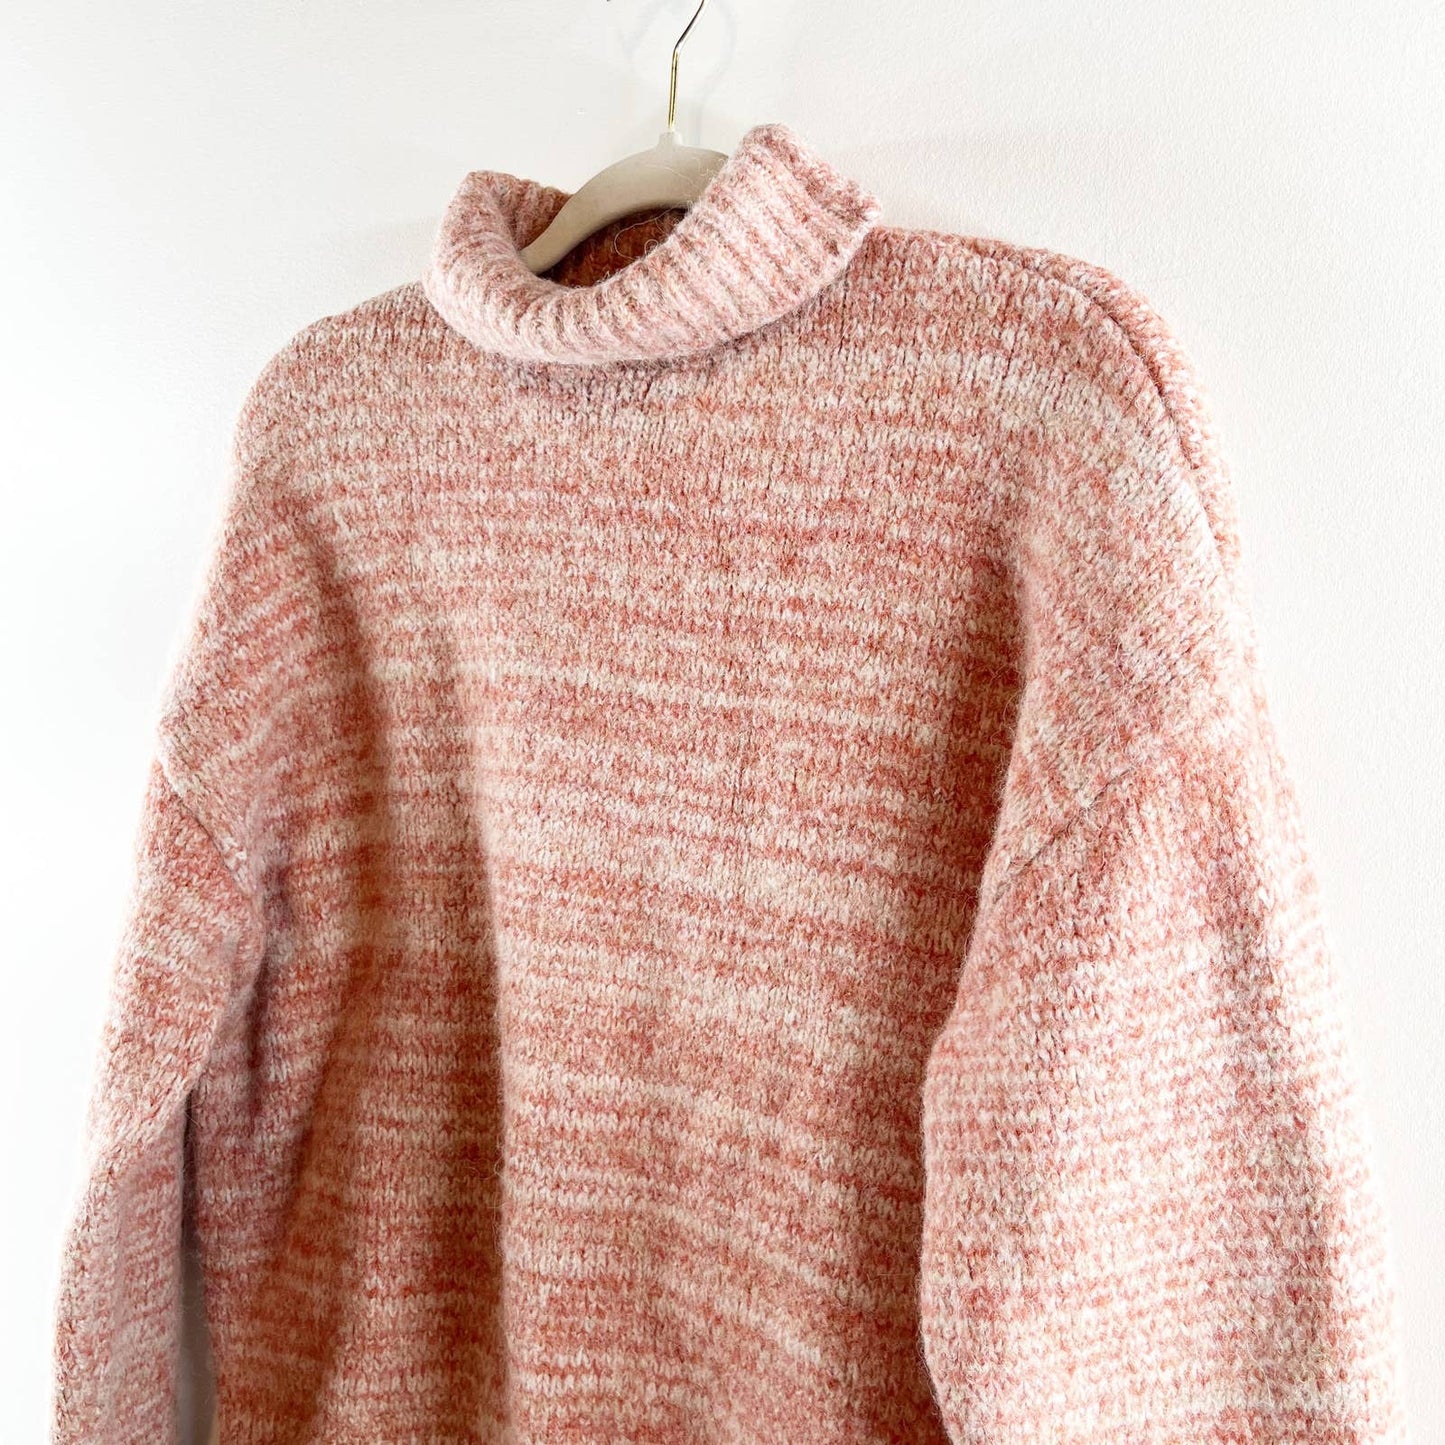 Zara Relaxed Fit Dropped Shoulder Turtleneck Knit Pullover Sweater Beige Red M/L